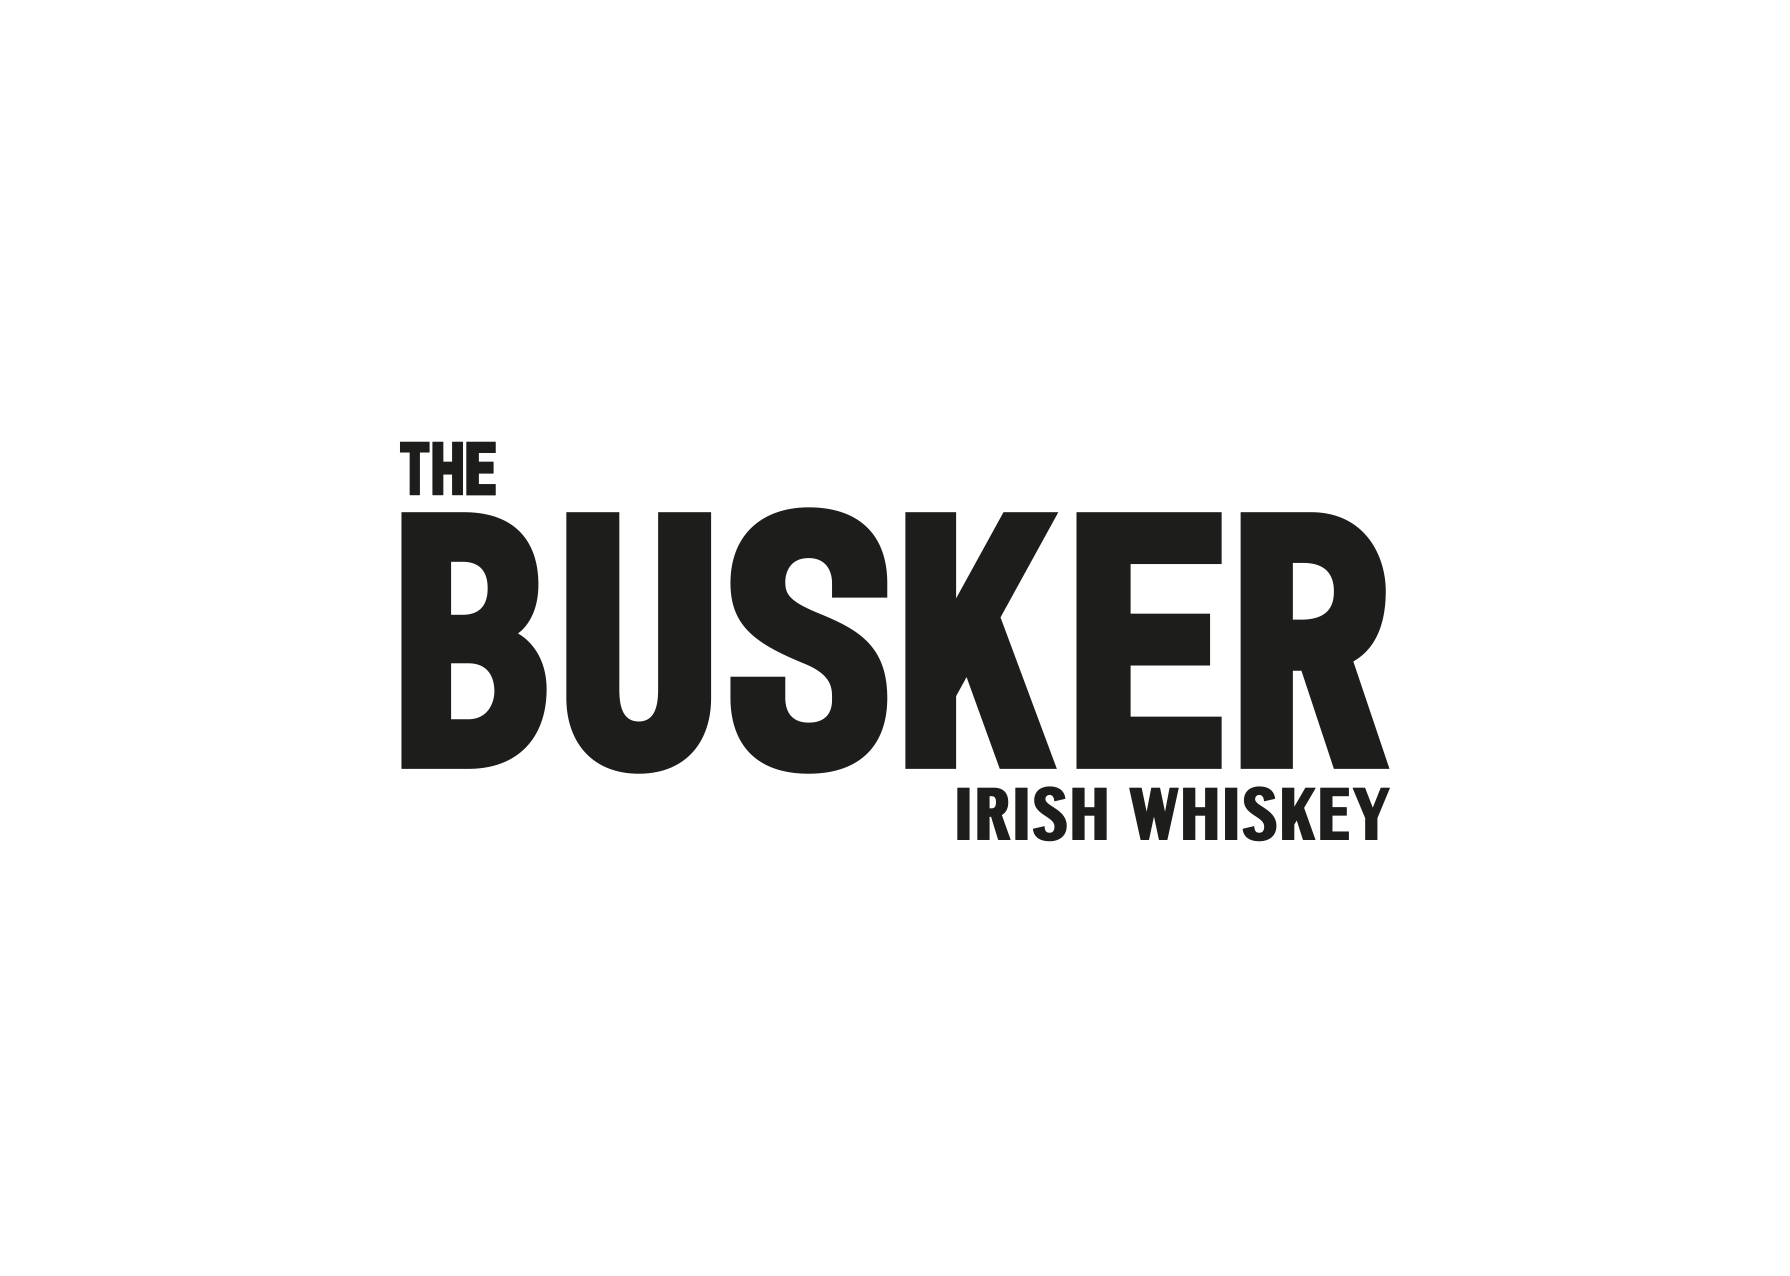 THE BUSKER